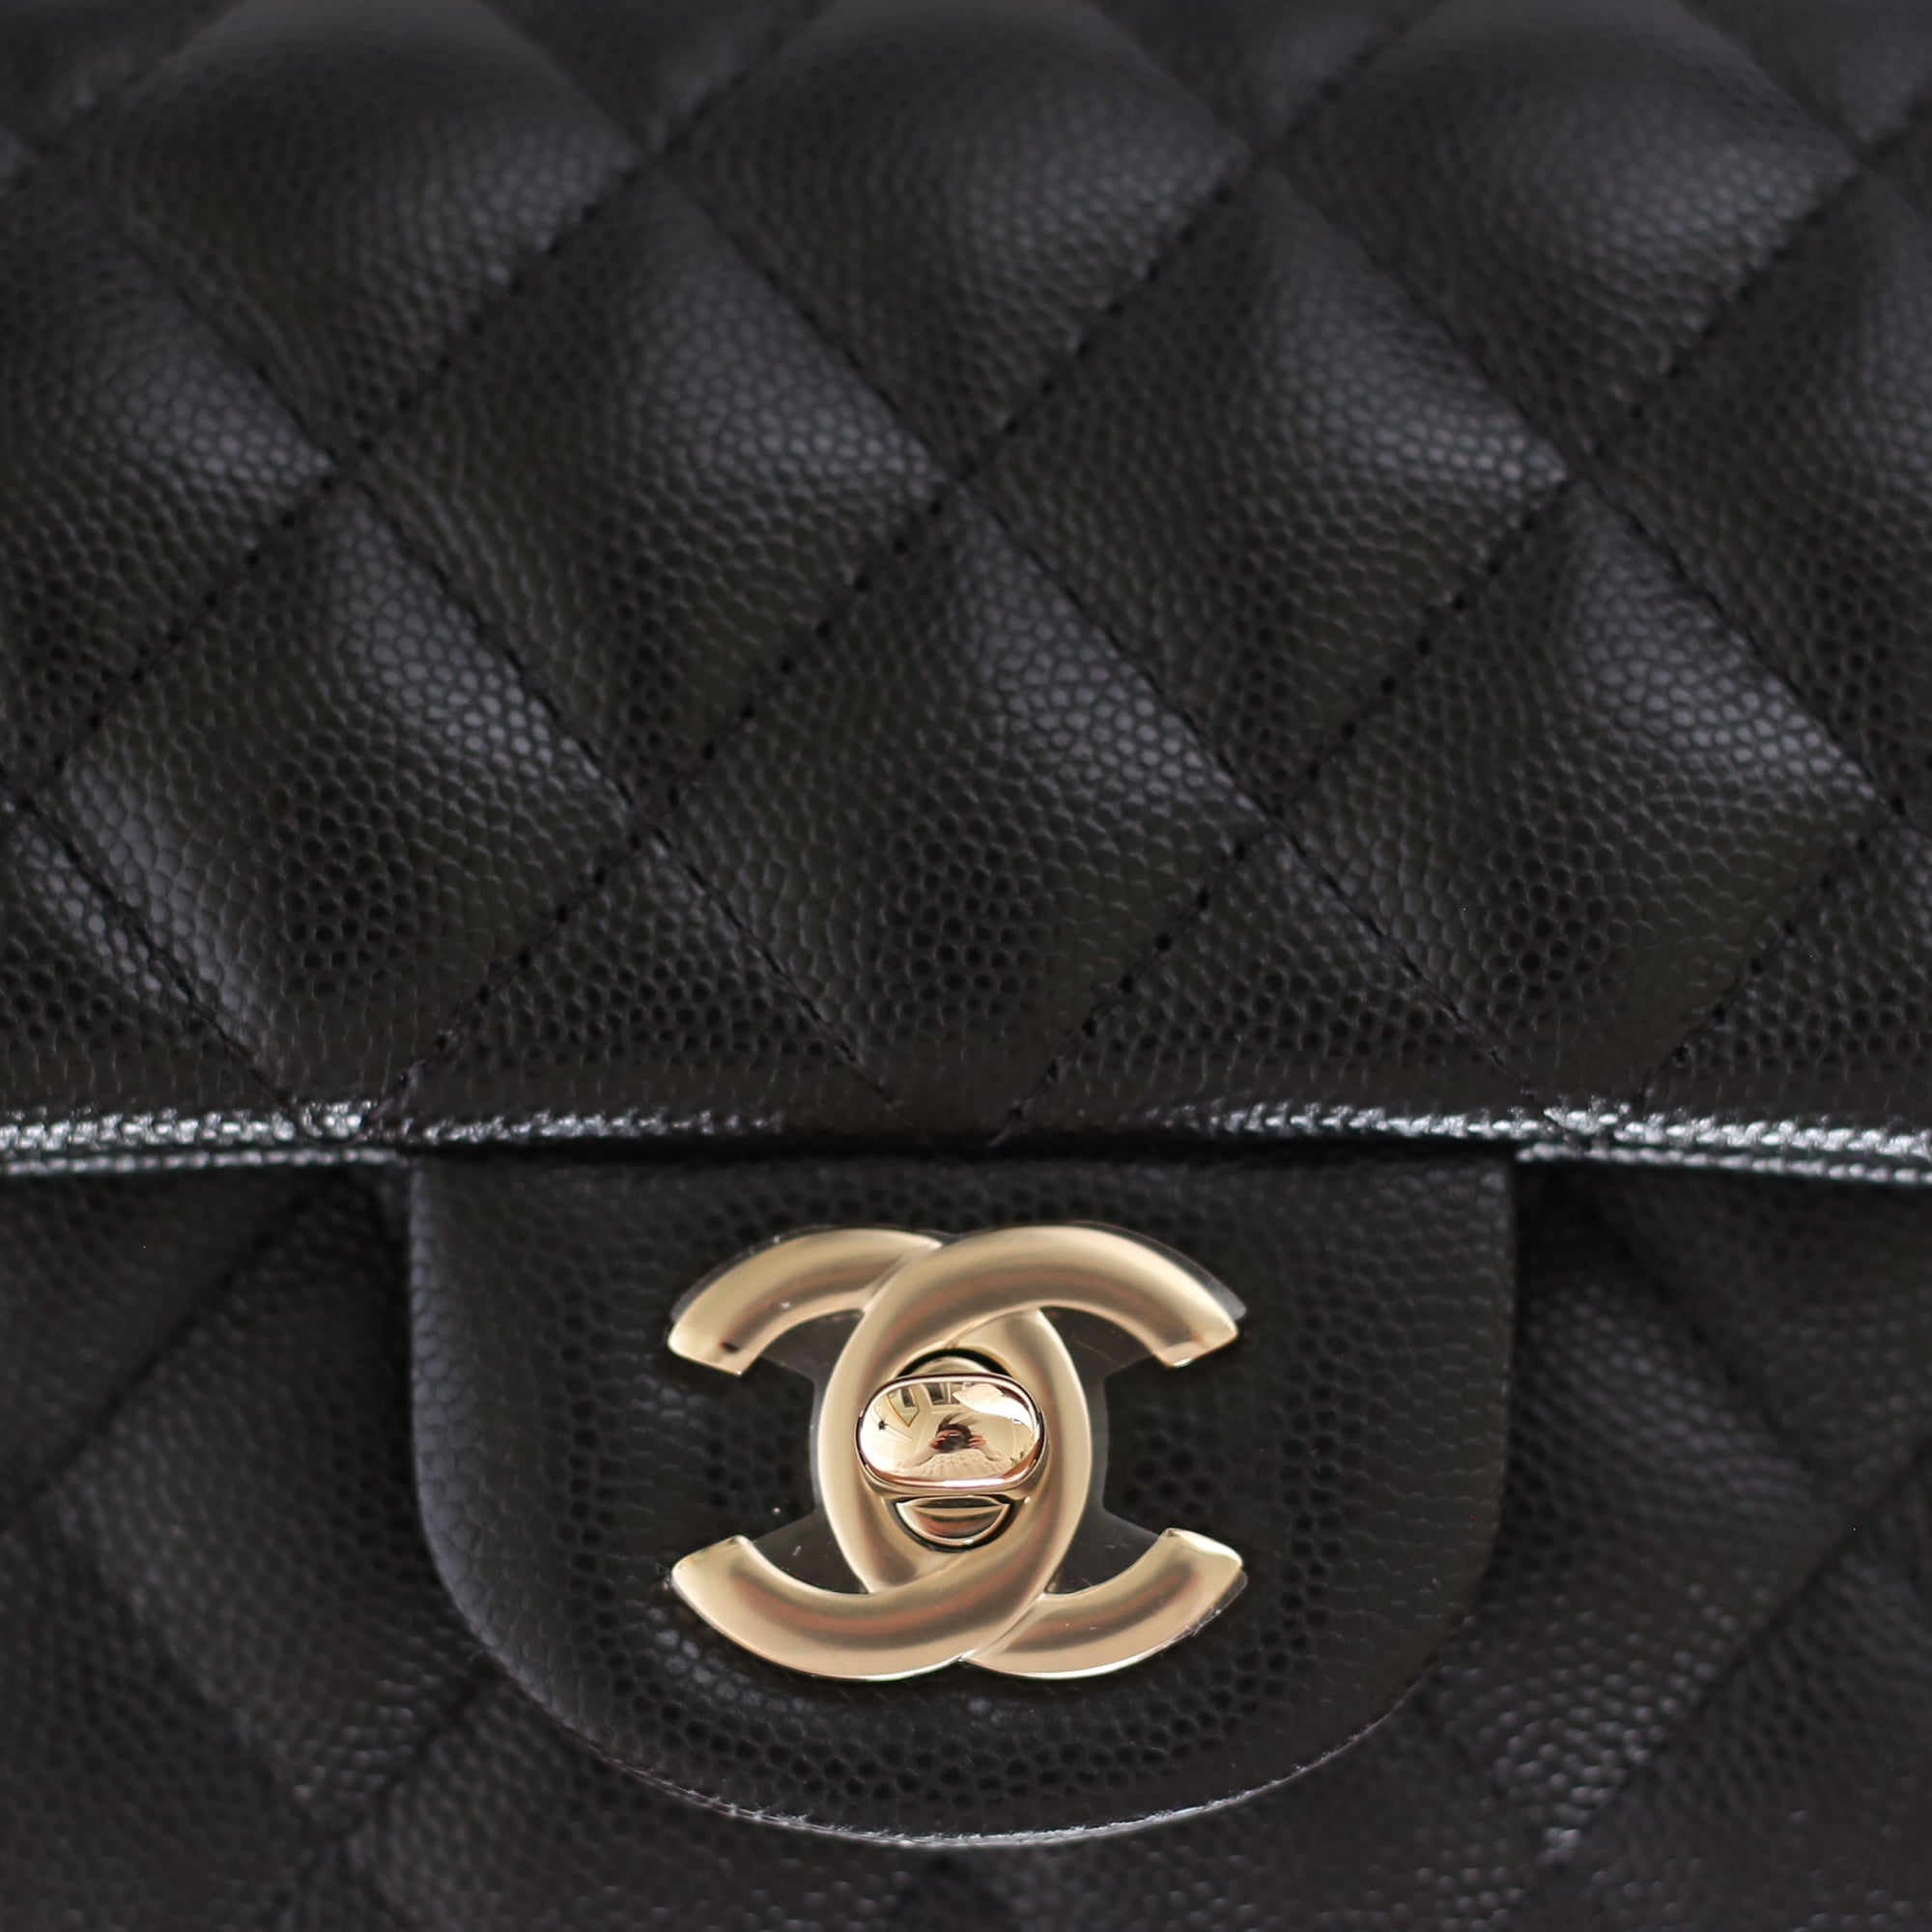 Chanel Quilted Clutch with Chain Black Caviar Silver Hardware